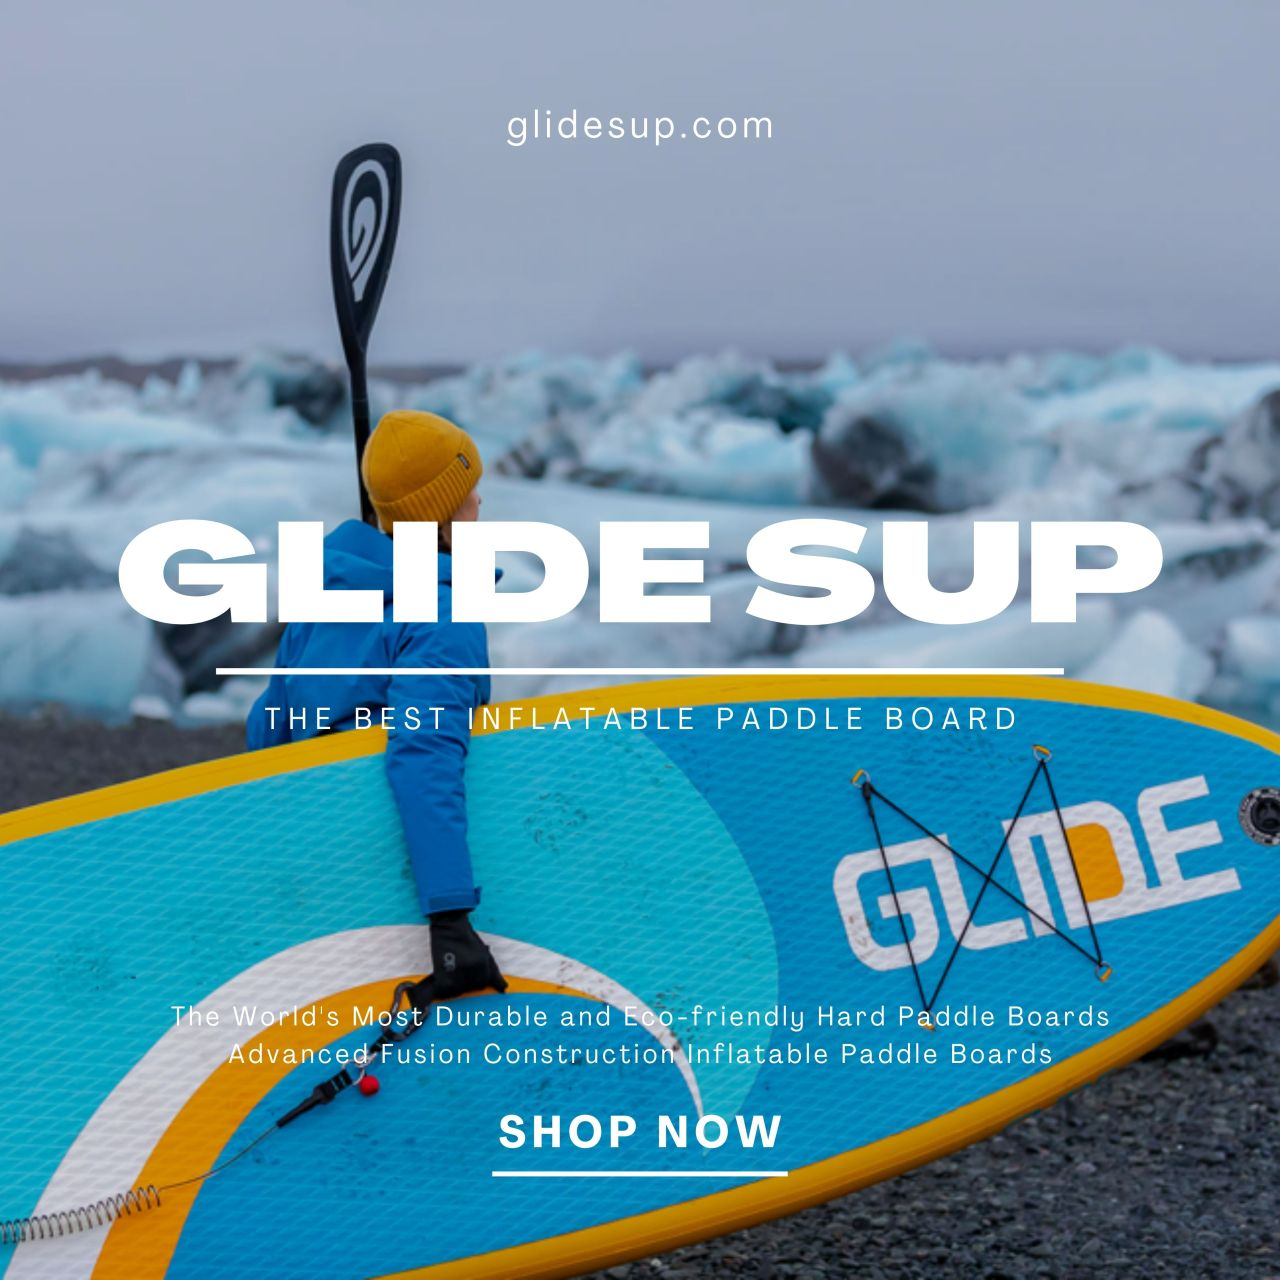 Glide paddle boards the best paddle boards made. Eco friendly paddle boards and inflatable paddle boards.